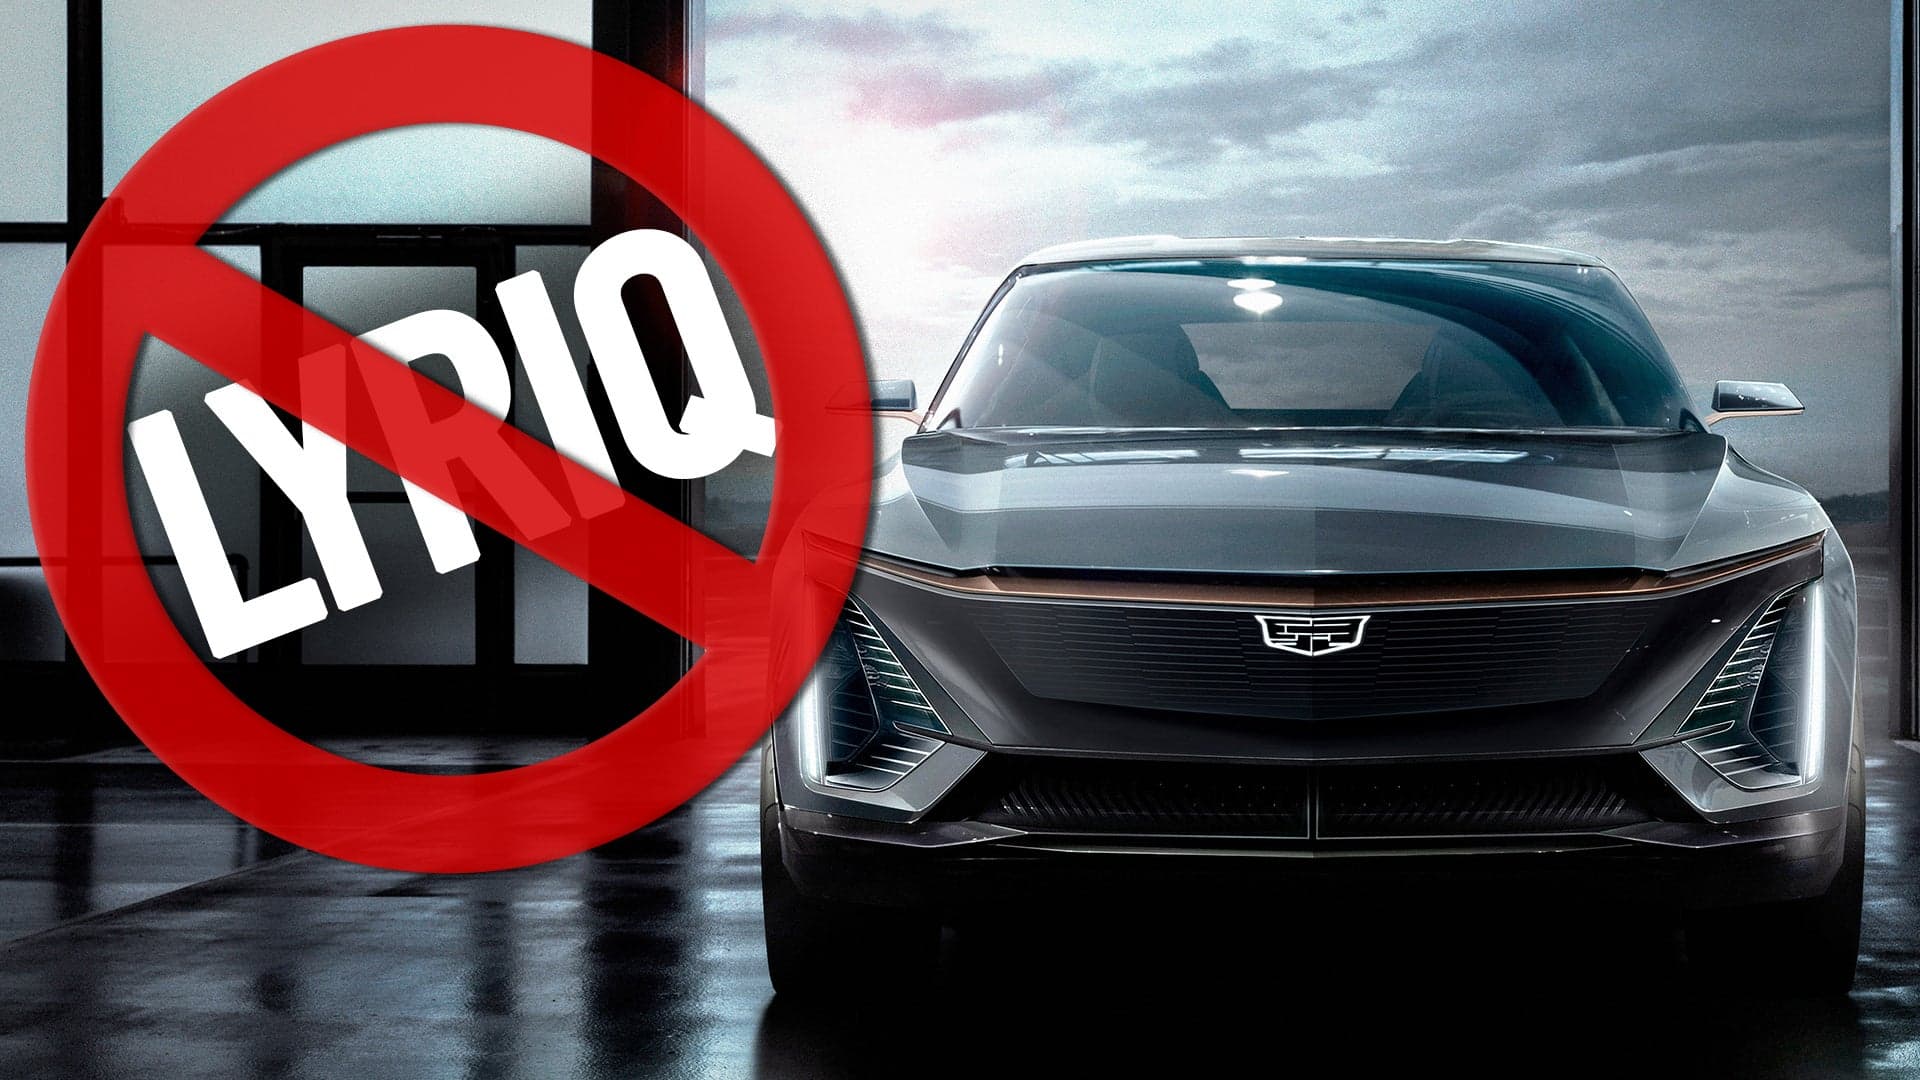 Cadillac Totally Botched Its Return to Real Car Names with the Lyriq and Celestiq